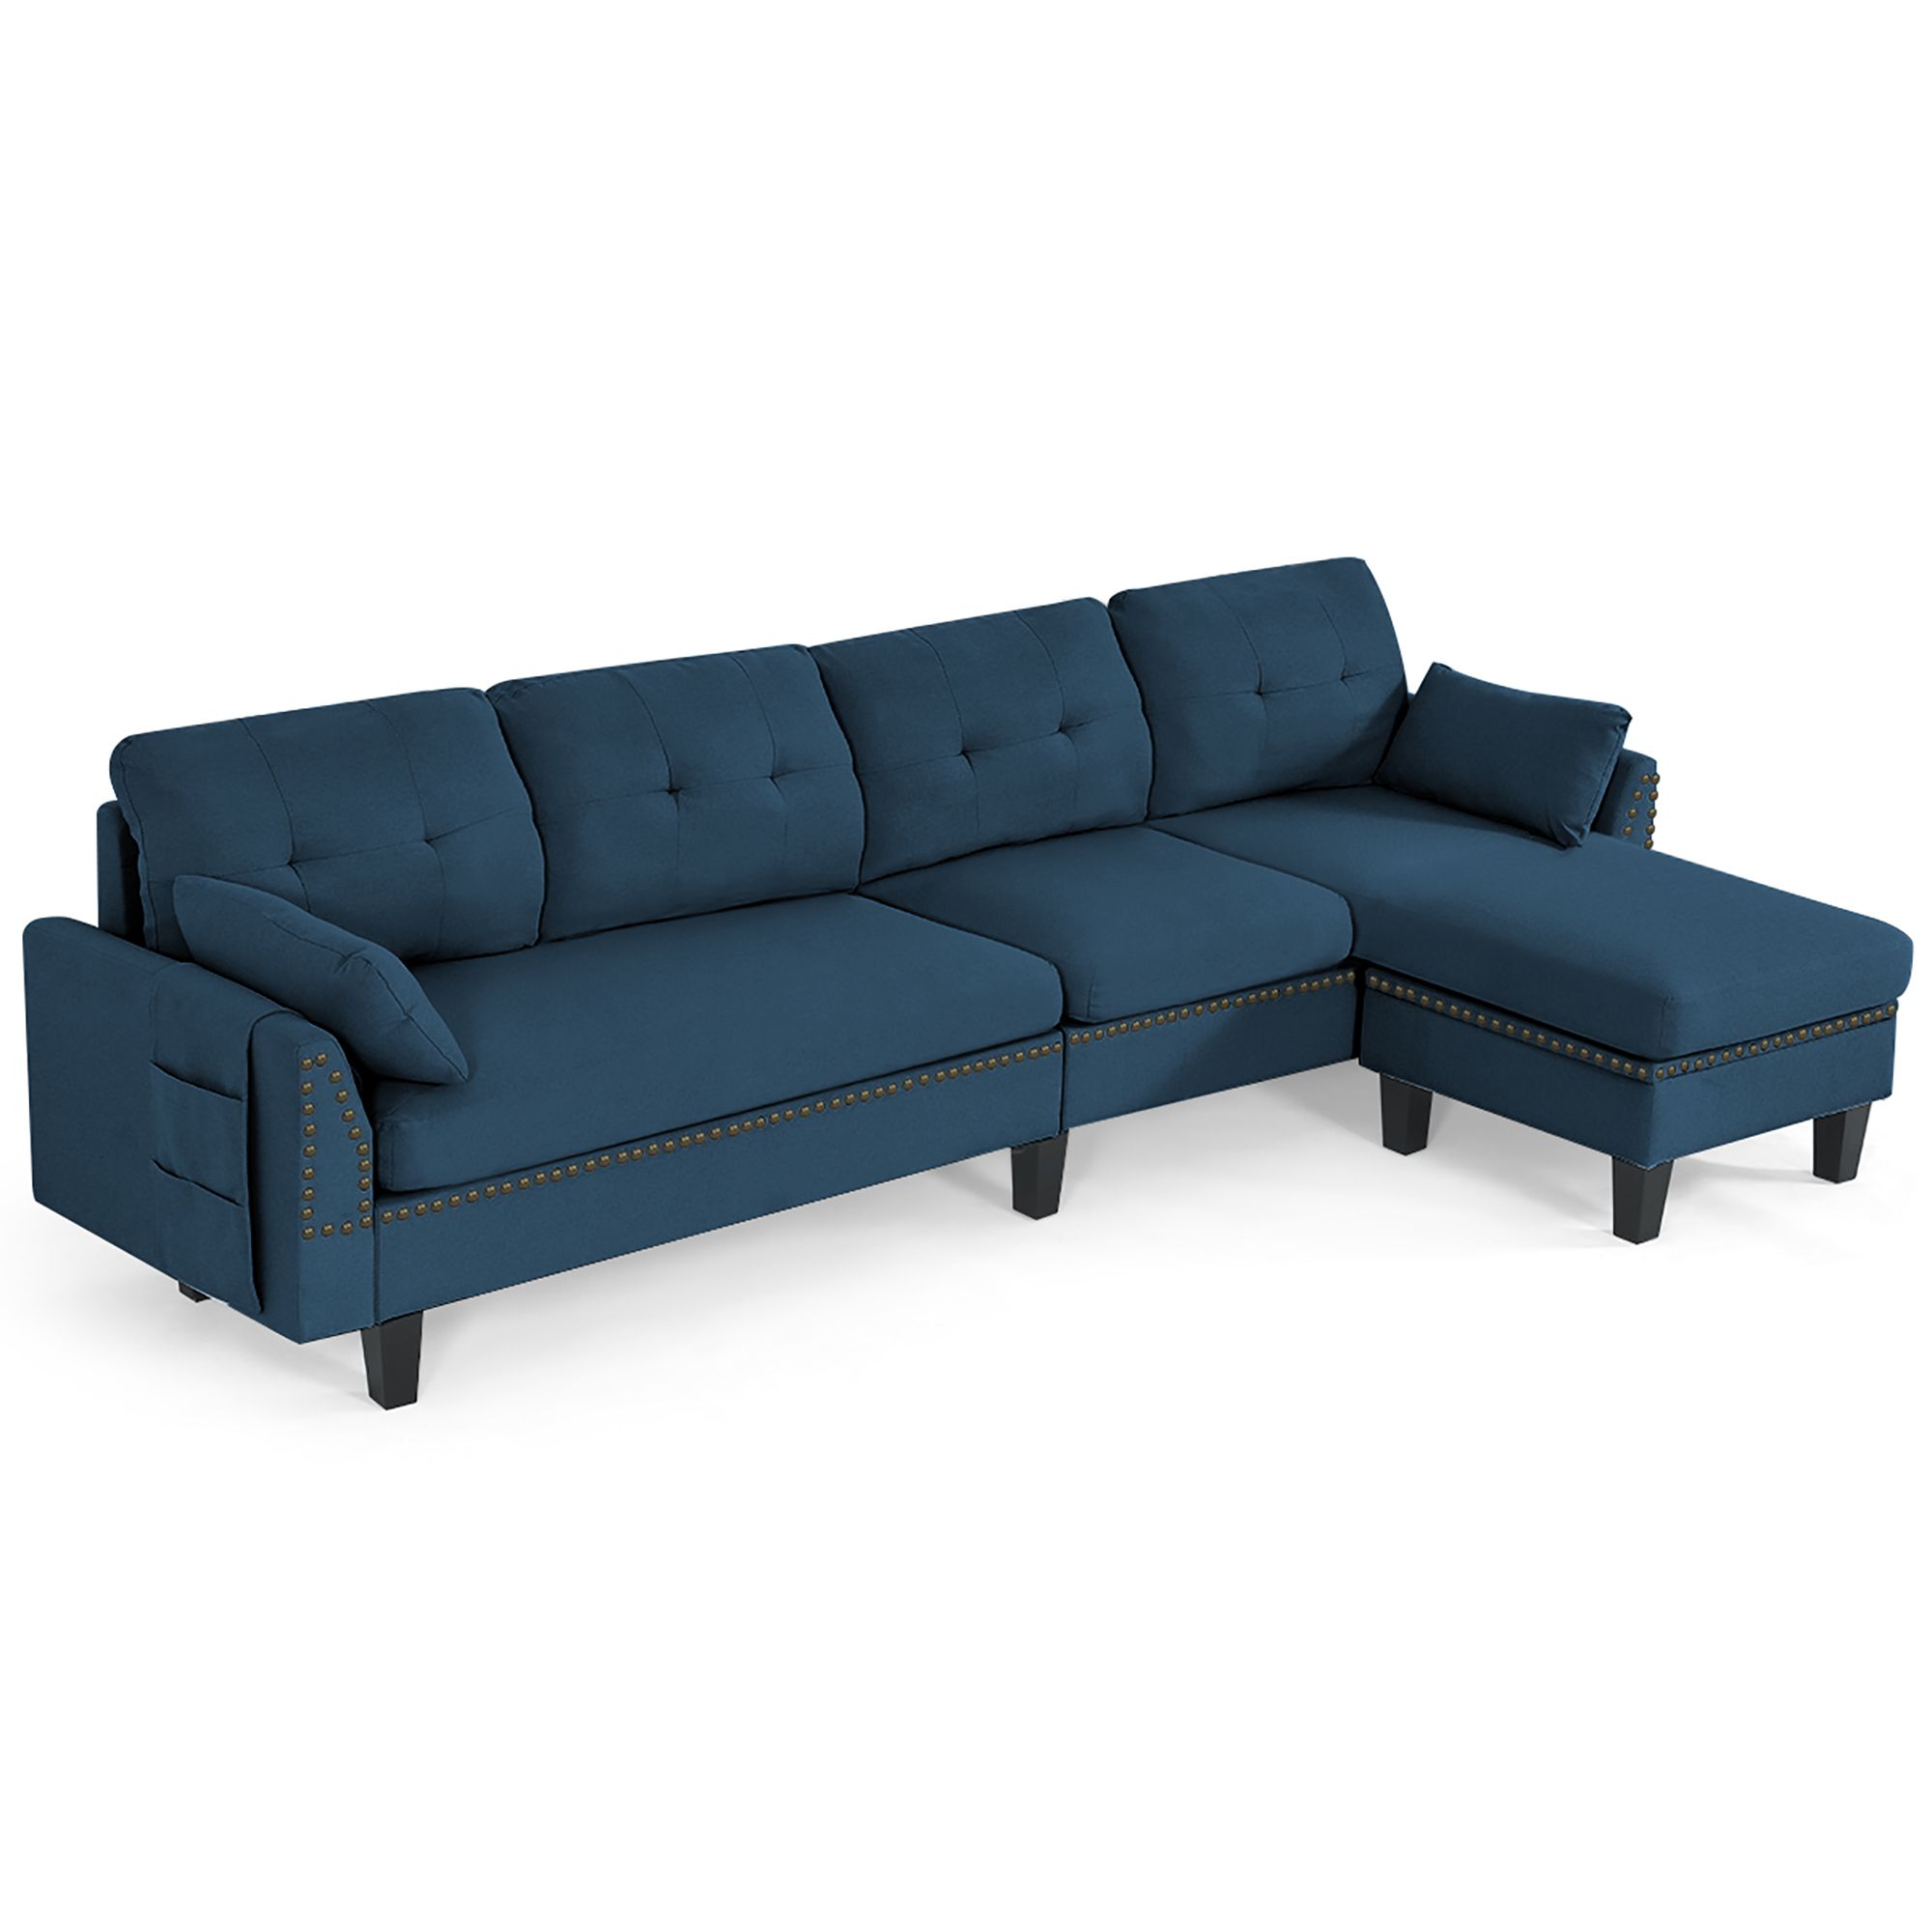 Costway Convertible Sectional Sofa Couch 4 Seat L Shaped With Regard To Convertible Sofas (View 13 of 15)